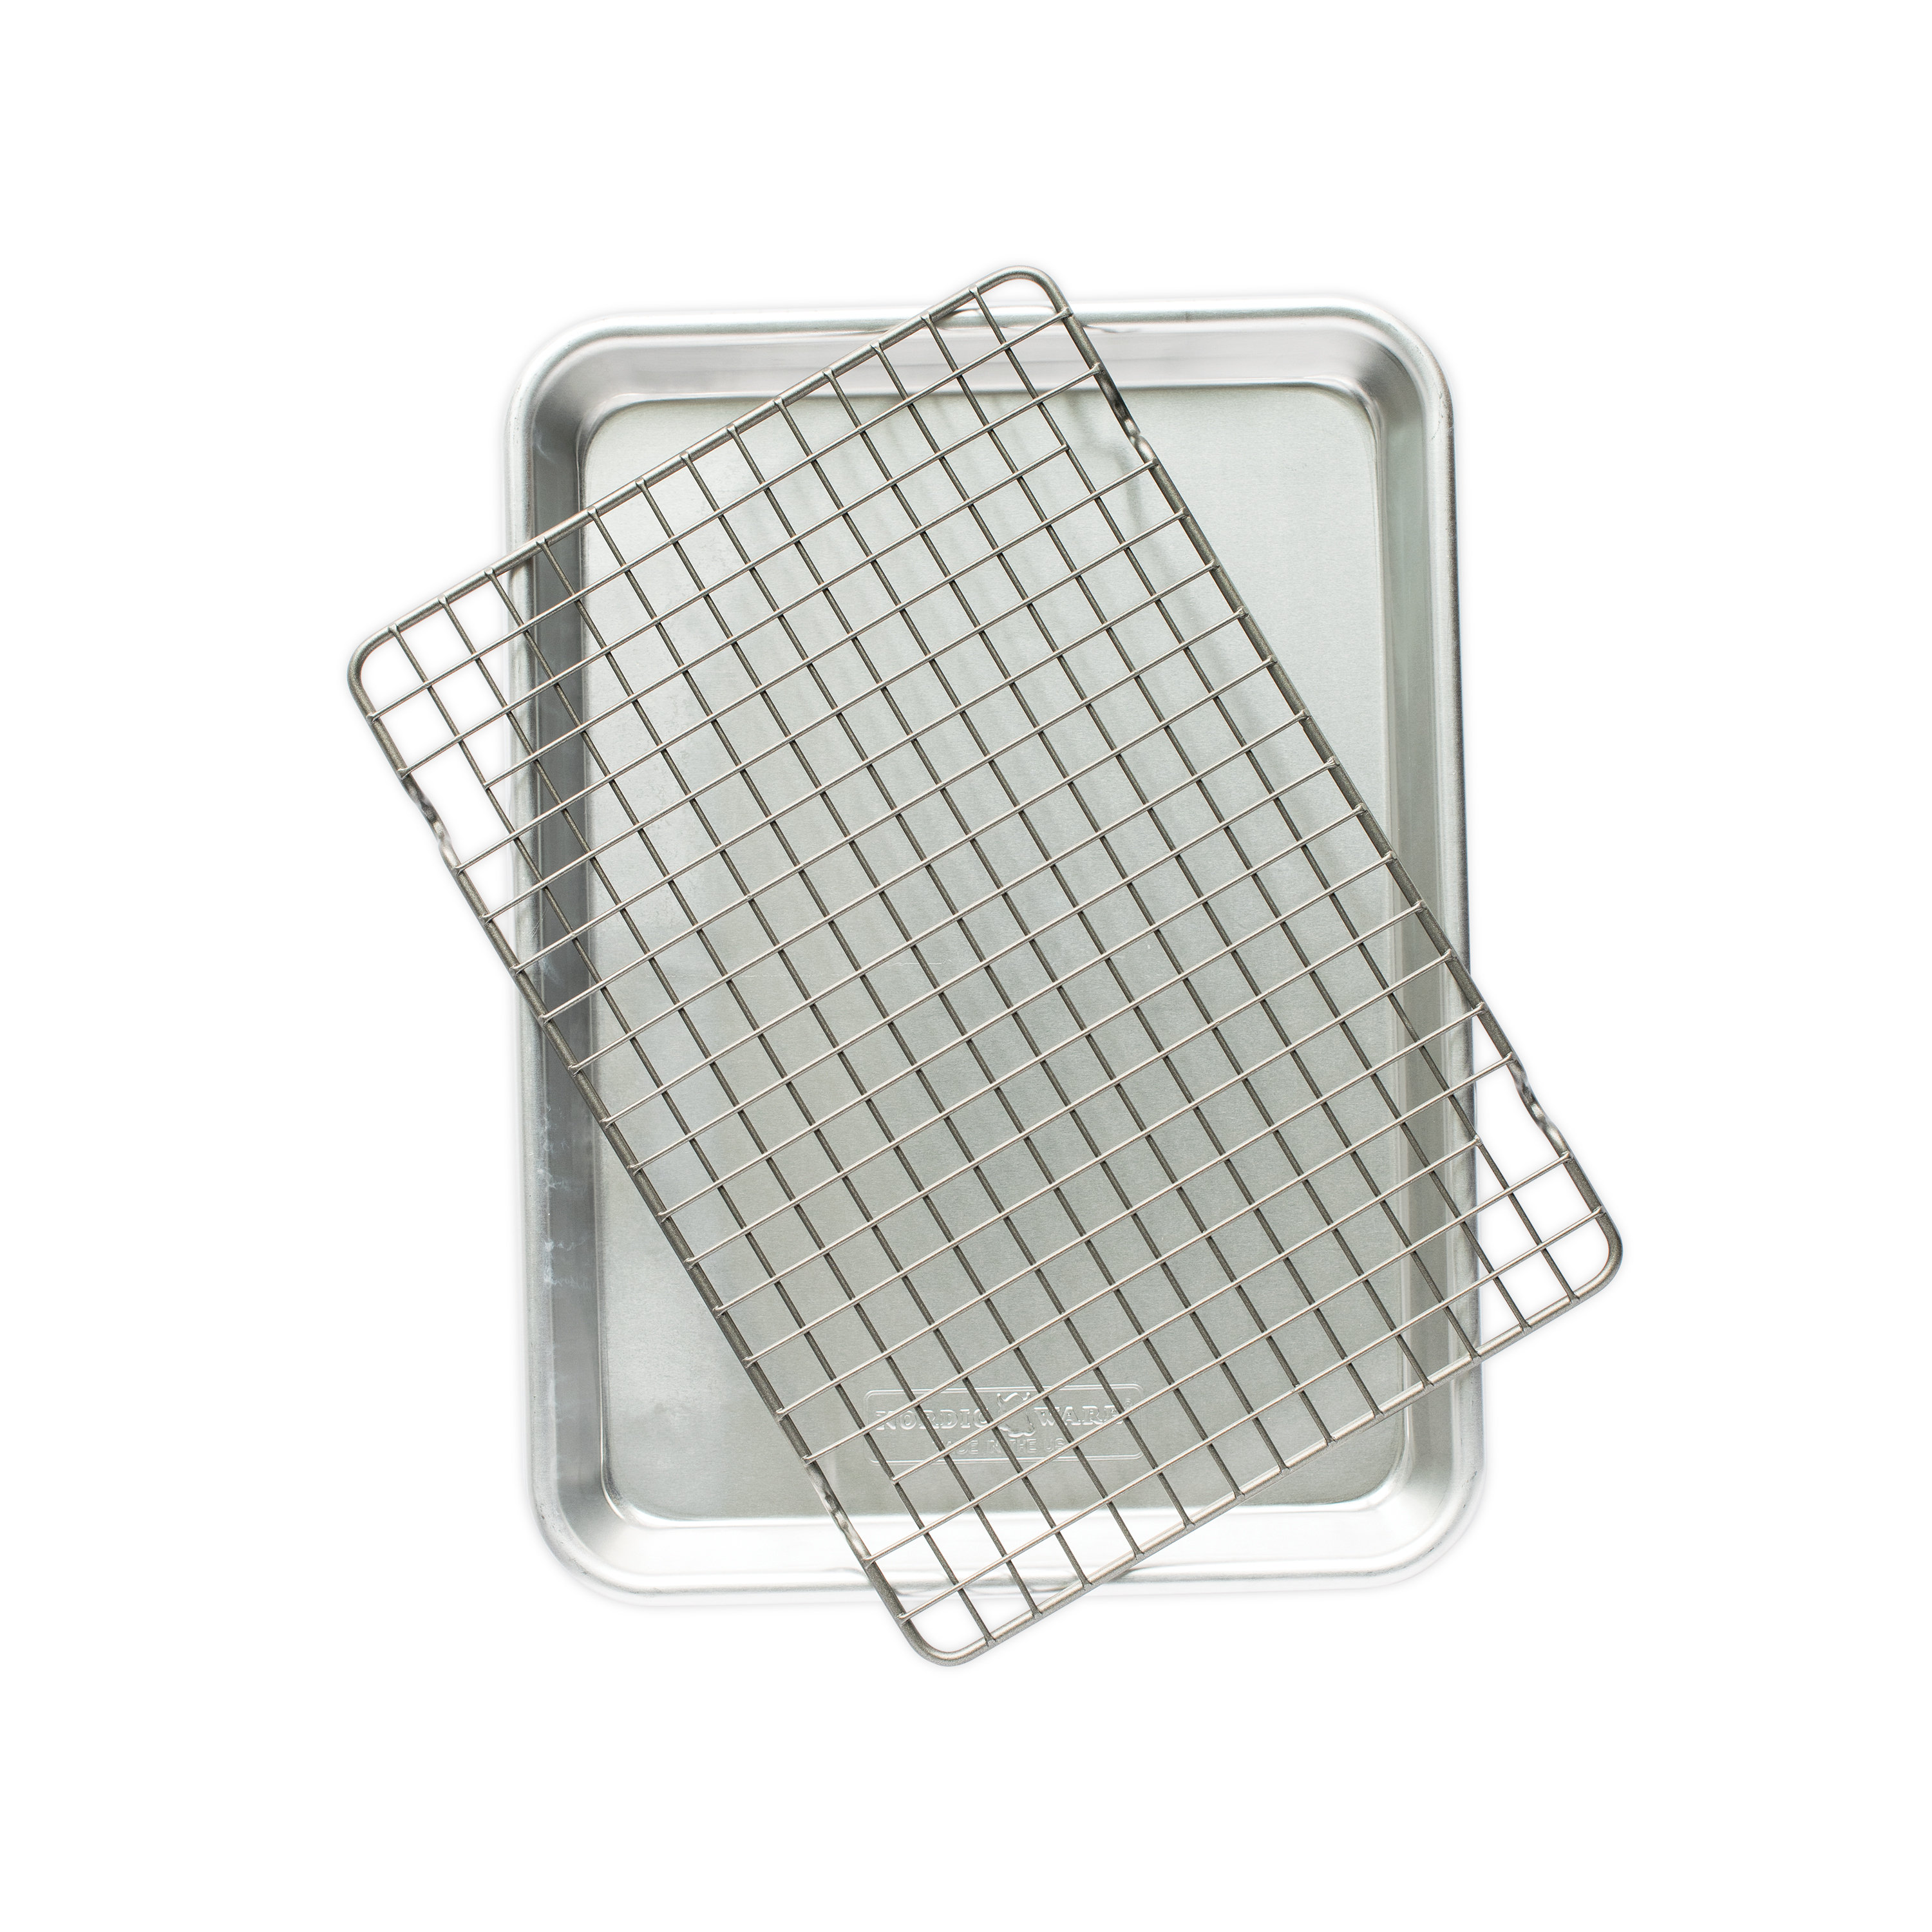 Stackable Cooling Grids - Nordic Ware